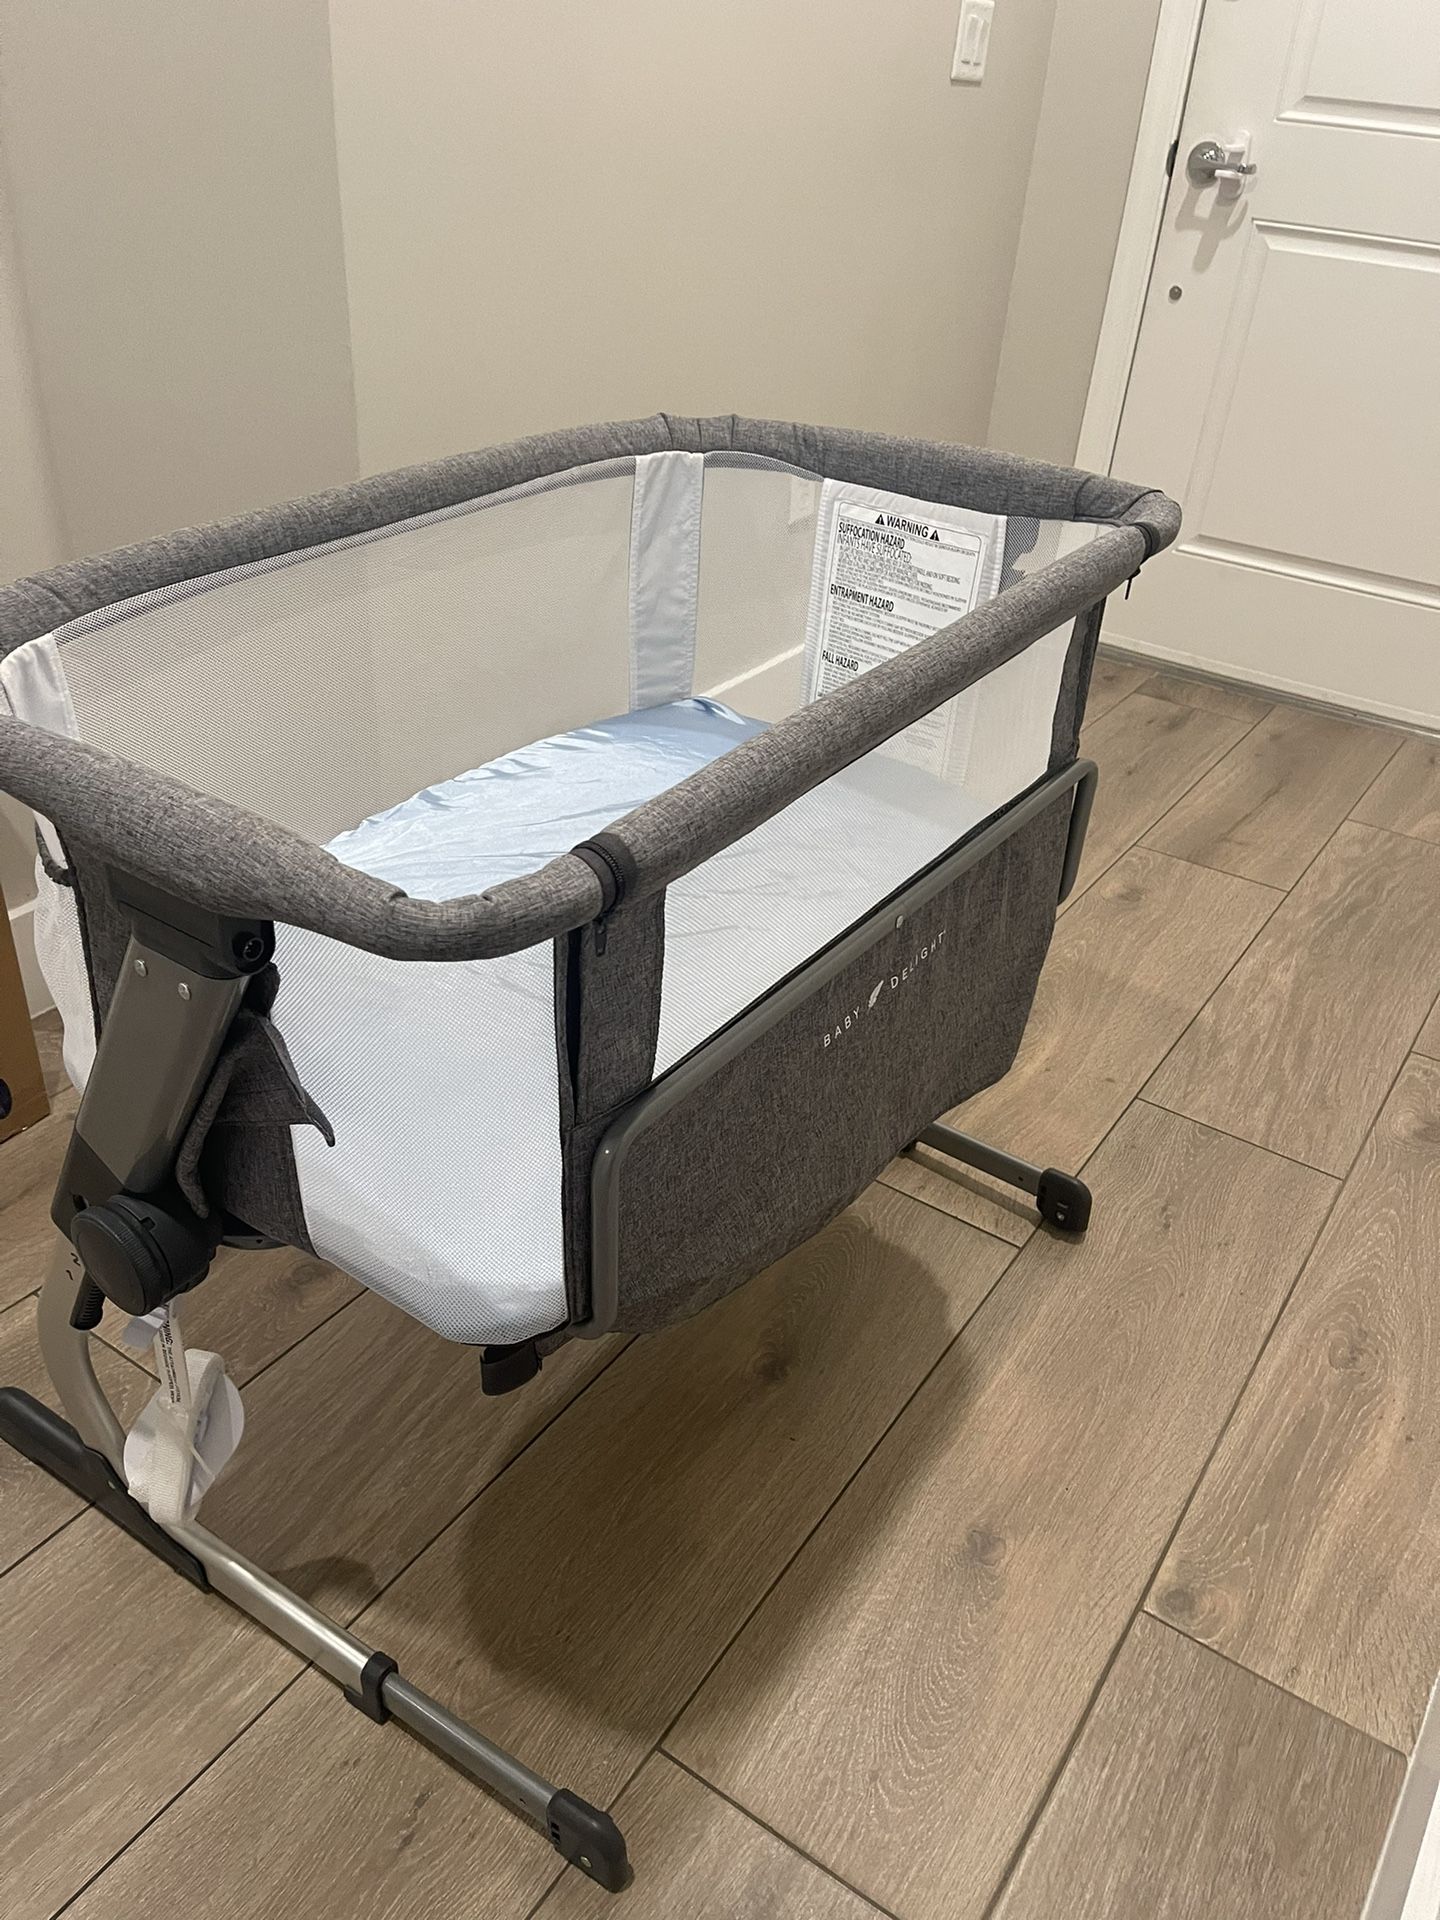 Bassinet - Excellent Condition Like New